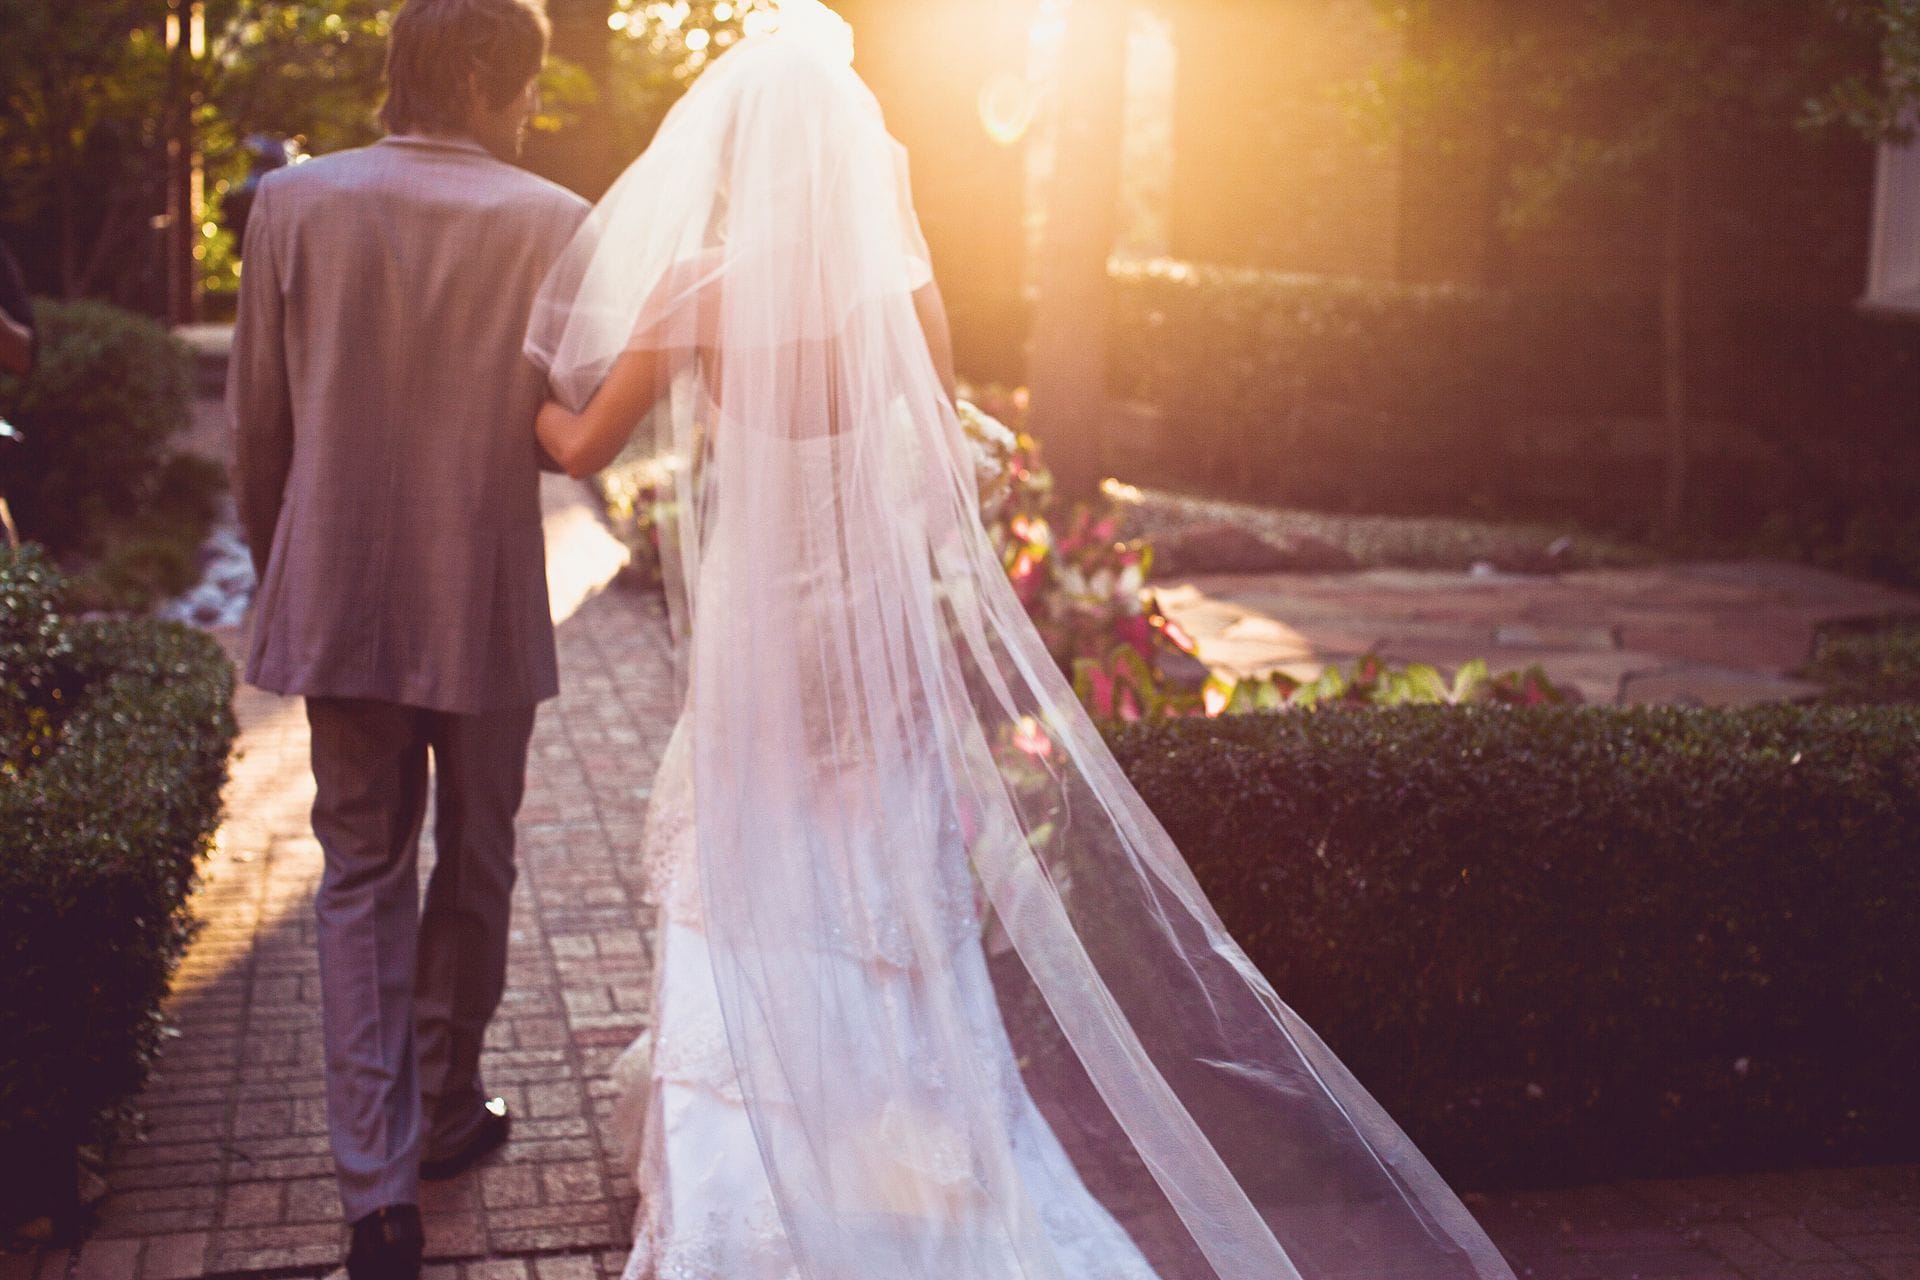 Wedding Insurance: What Is It and Do You Need It?